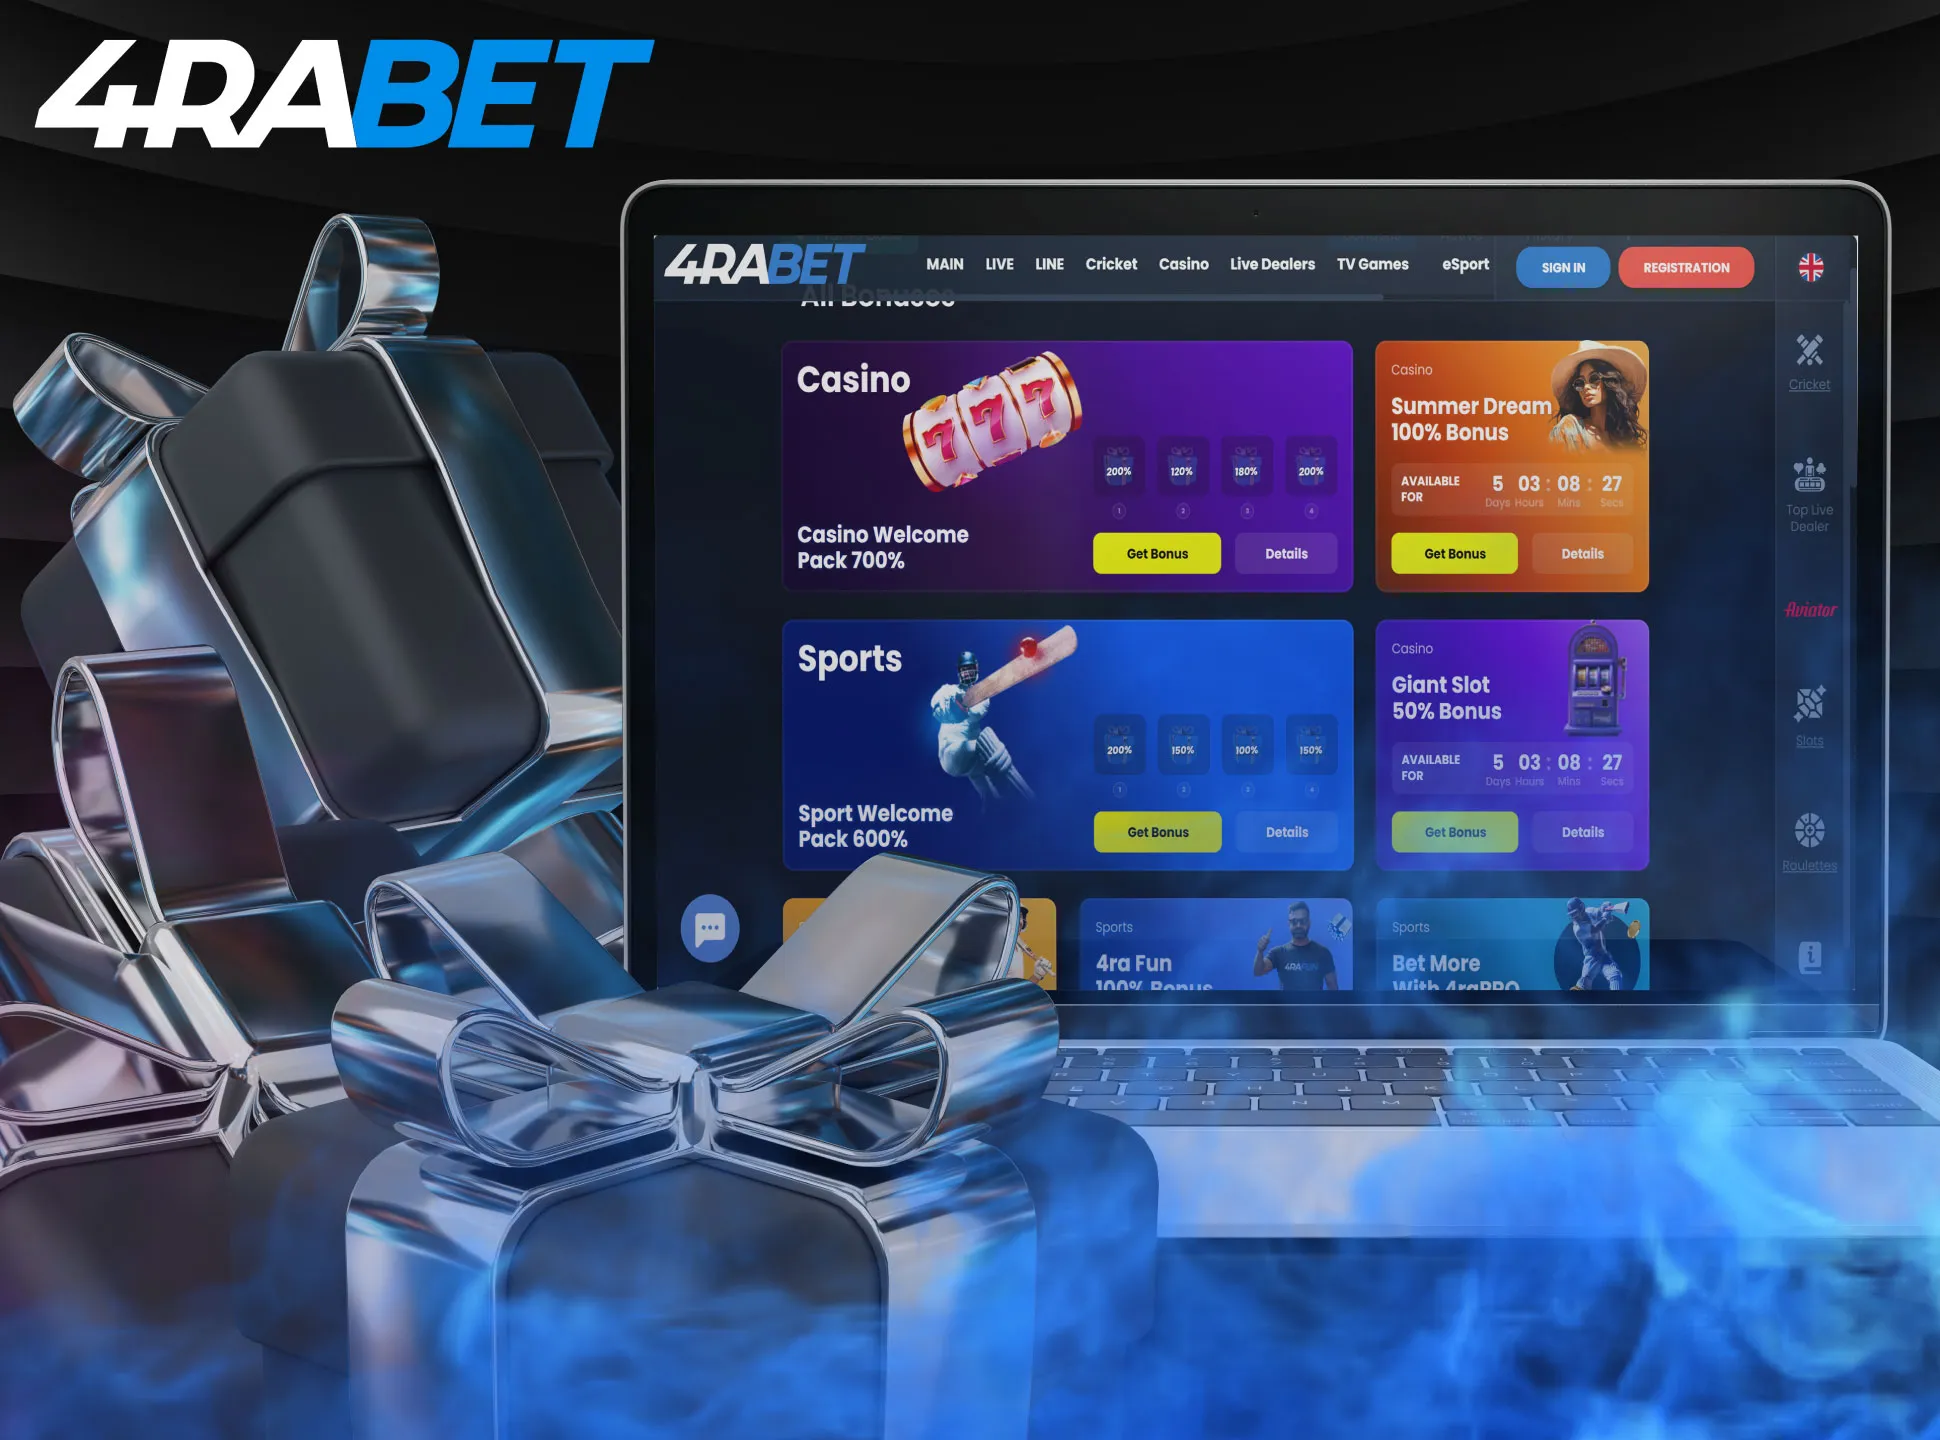 4rabet gives new users a generous welcome bonus of up to 60,000 INR on sports betting.